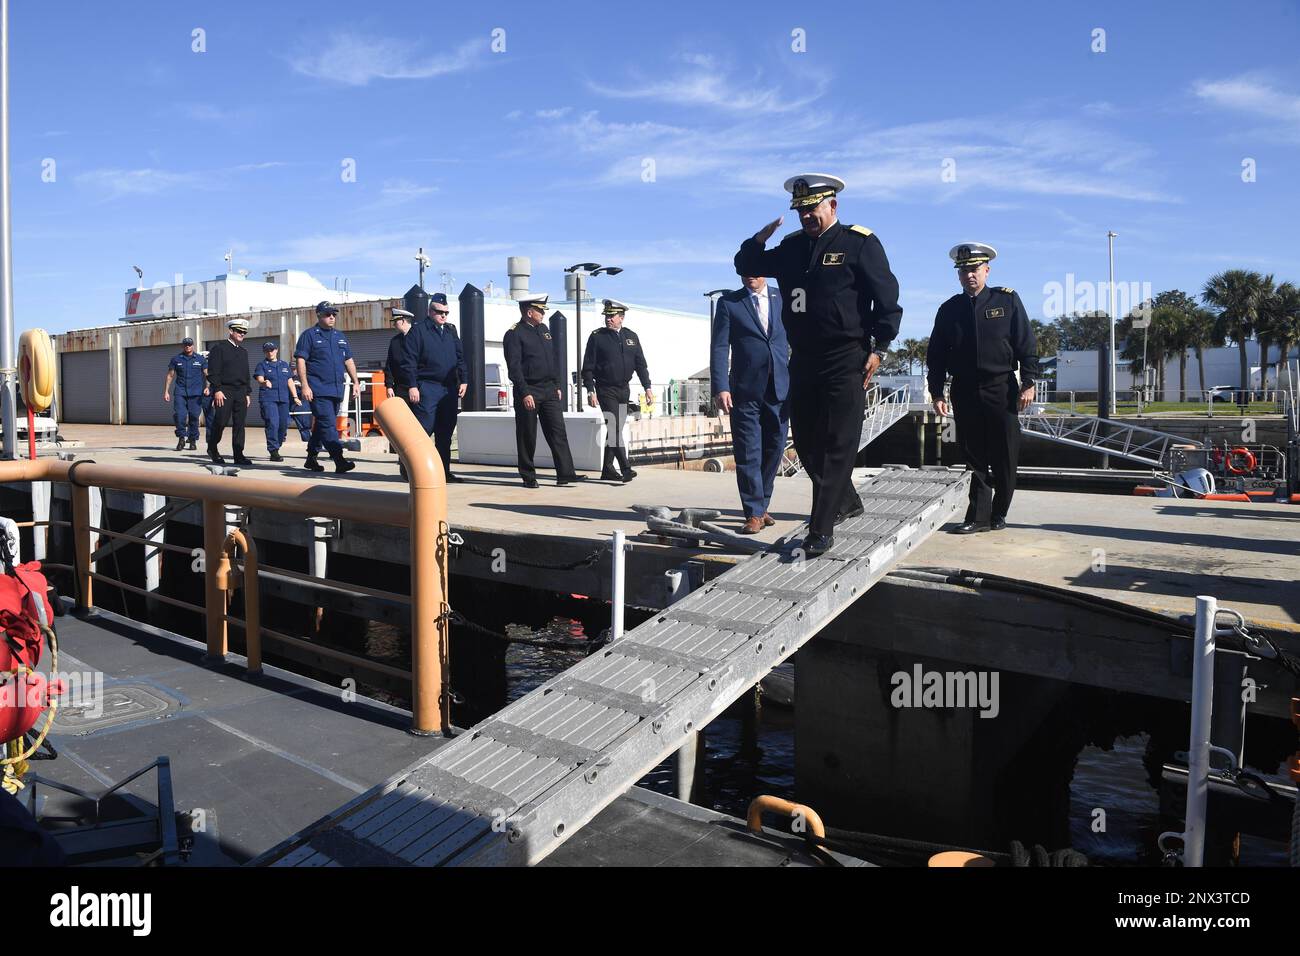 230207-N-DB801-0516  MAYPORT, Fla. - (Feb. 7, 2023) — Ecuadorian Navy Rear Adm. Jaime Patricio Vela Erazo, Chief of Staff of the Ecuadorian Navy, offers a salute as he comes aboard the U.S. Coast Guard Cutter Heron (WPB-87344) pierside at U.S. Coast Guard Station Mayport, Feb. 7, 2023. The Ecuadorian Navy tour of U.S. Coast Guard cutter and facilities was in conjunction with U.S. Naval Forces Southern Command and U.S. Navy 4th Fleet bilateral Maritime Staff Talks, which support U.S. joint and combined maritime strategy by building and strengthening working relationships with U.S. and partner n Stock Photo